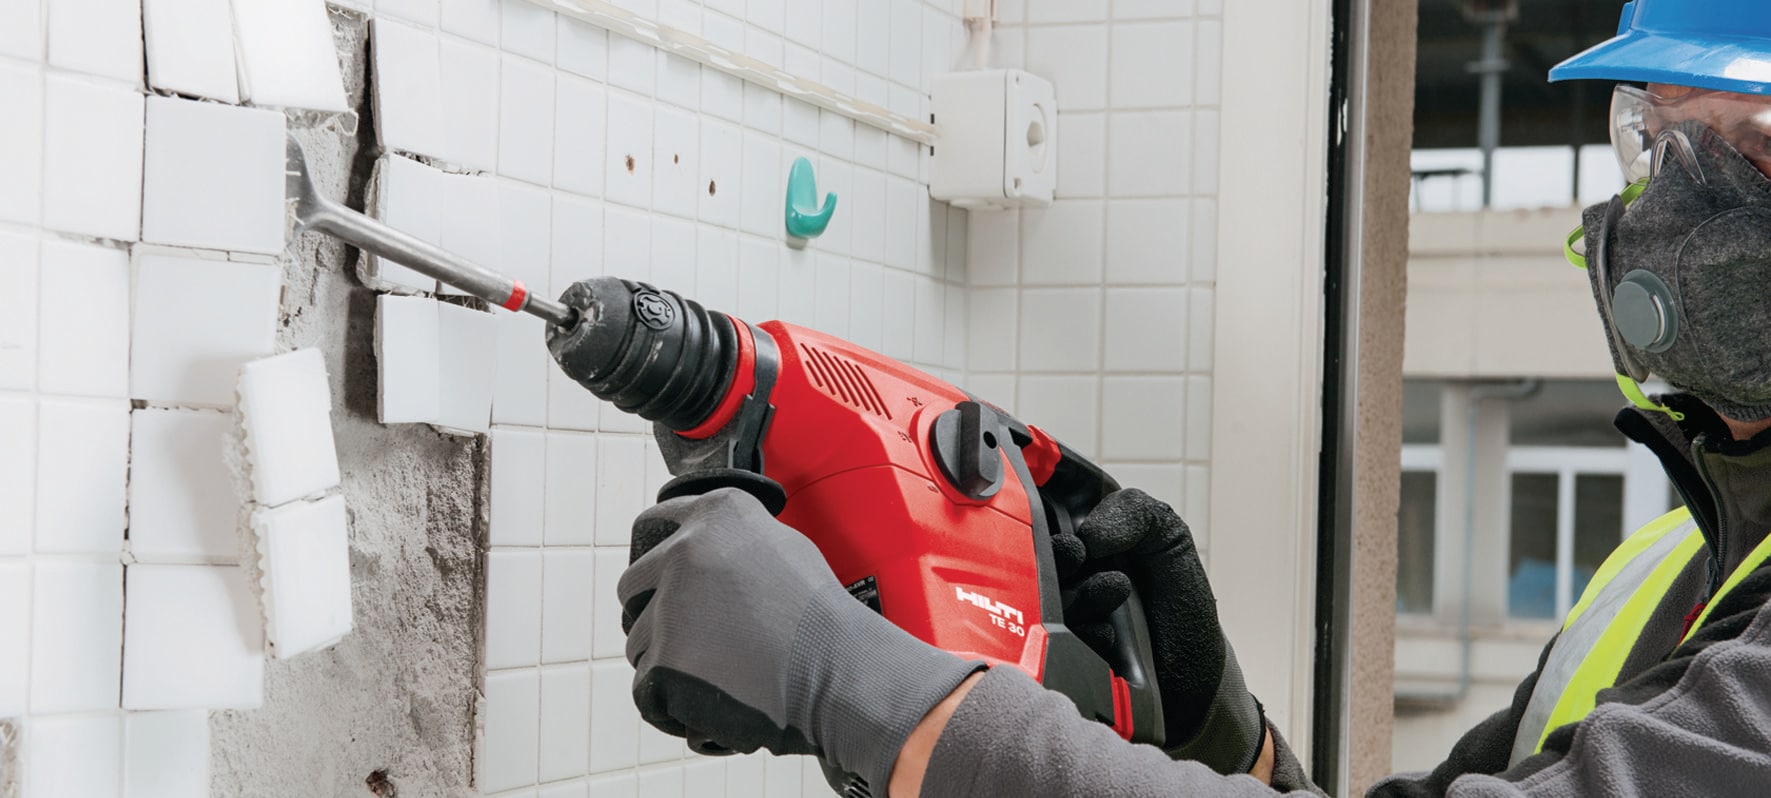 Celsius distillation Rise TE 30-AVR Rotary hammer - Corded Rotary Hammers SDS-Plus - Hilti USA